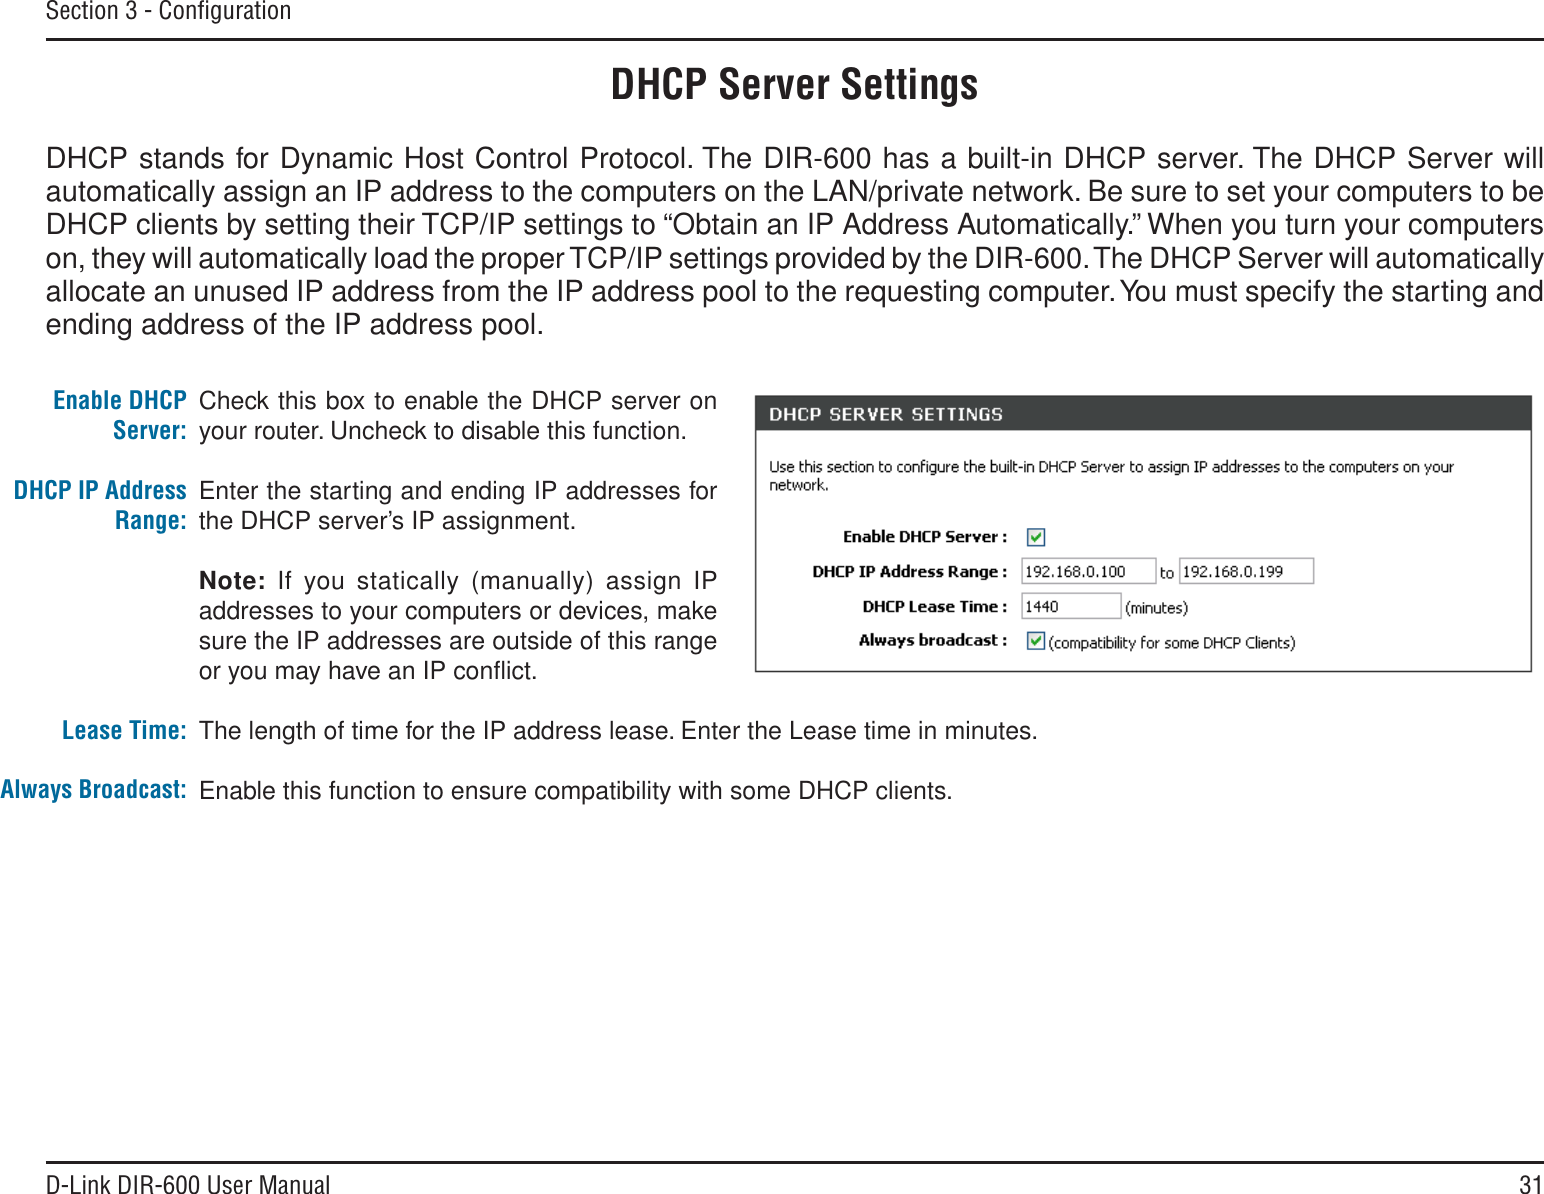 31D-Link DIR-600 User ManualSection 3 - ConﬁgurationCheck this box to enable the DHCP server on your router. Uncheck to disable this function.Enter the starting and ending IP addresses for the DHCP server’s IP assignment.Note: If you statically (manually) assign IP addresses to your computers or devices, make sure the IP addresses are outside of this range or you may have an IP conﬂict. The length of time for the IP address lease. Enter the Lease time in minutes.Enable this function to ensure compatibility with some DHCP clients.Enable DHCP Server:DHCP IP Address Range:Lease Time:Always Broadcast:DHCP Server SettingsDHCP stands for Dynamic Host Control Protocol. The DIR-600 has a built-in DHCP server. The DHCP Server will automatically assign an IP address to the computers on the LAN/private network. Be sure to set your computers to be DHCP clients by setting their TCP/IP settings to “Obtain an IP Address Automatically.” When you turn your computers on, they will automatically load the proper TCP/IP settings provided by the DIR-600. The DHCP Server will automatically allocate an unused IP address from the IP address pool to the requesting computer. You must specify the starting and ending address of the IP address pool.